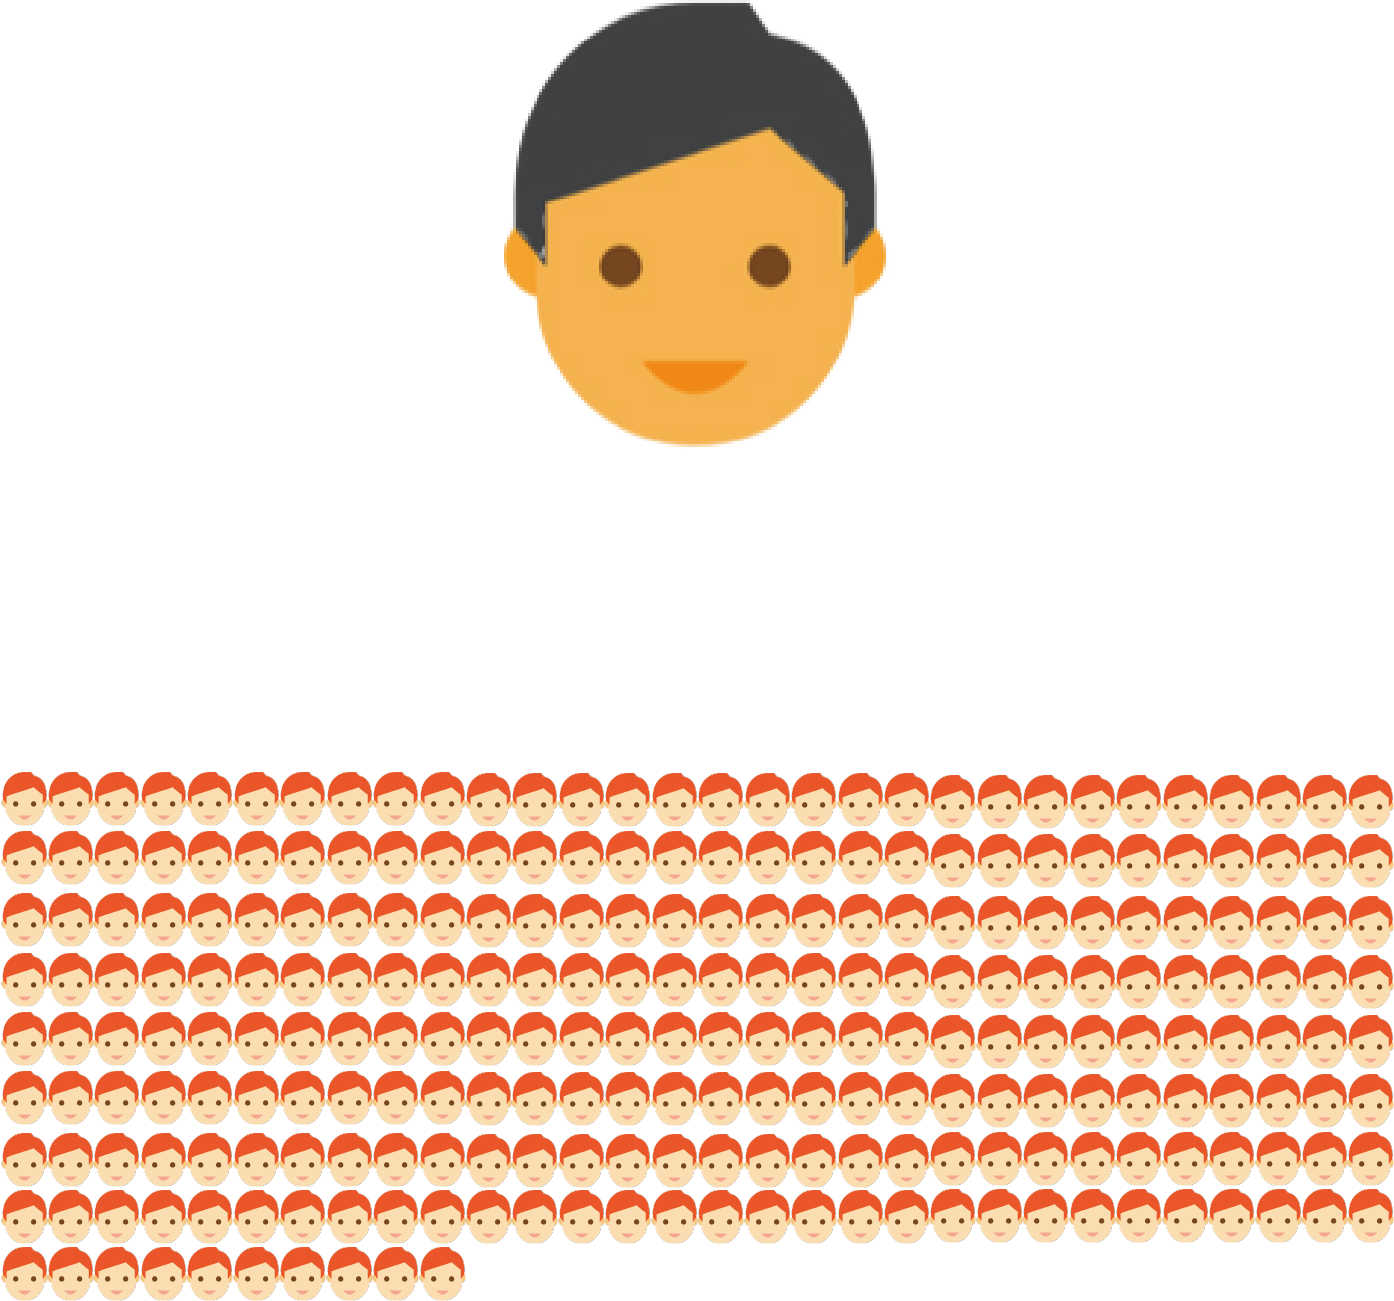 Ratio of social workers to students in the United States